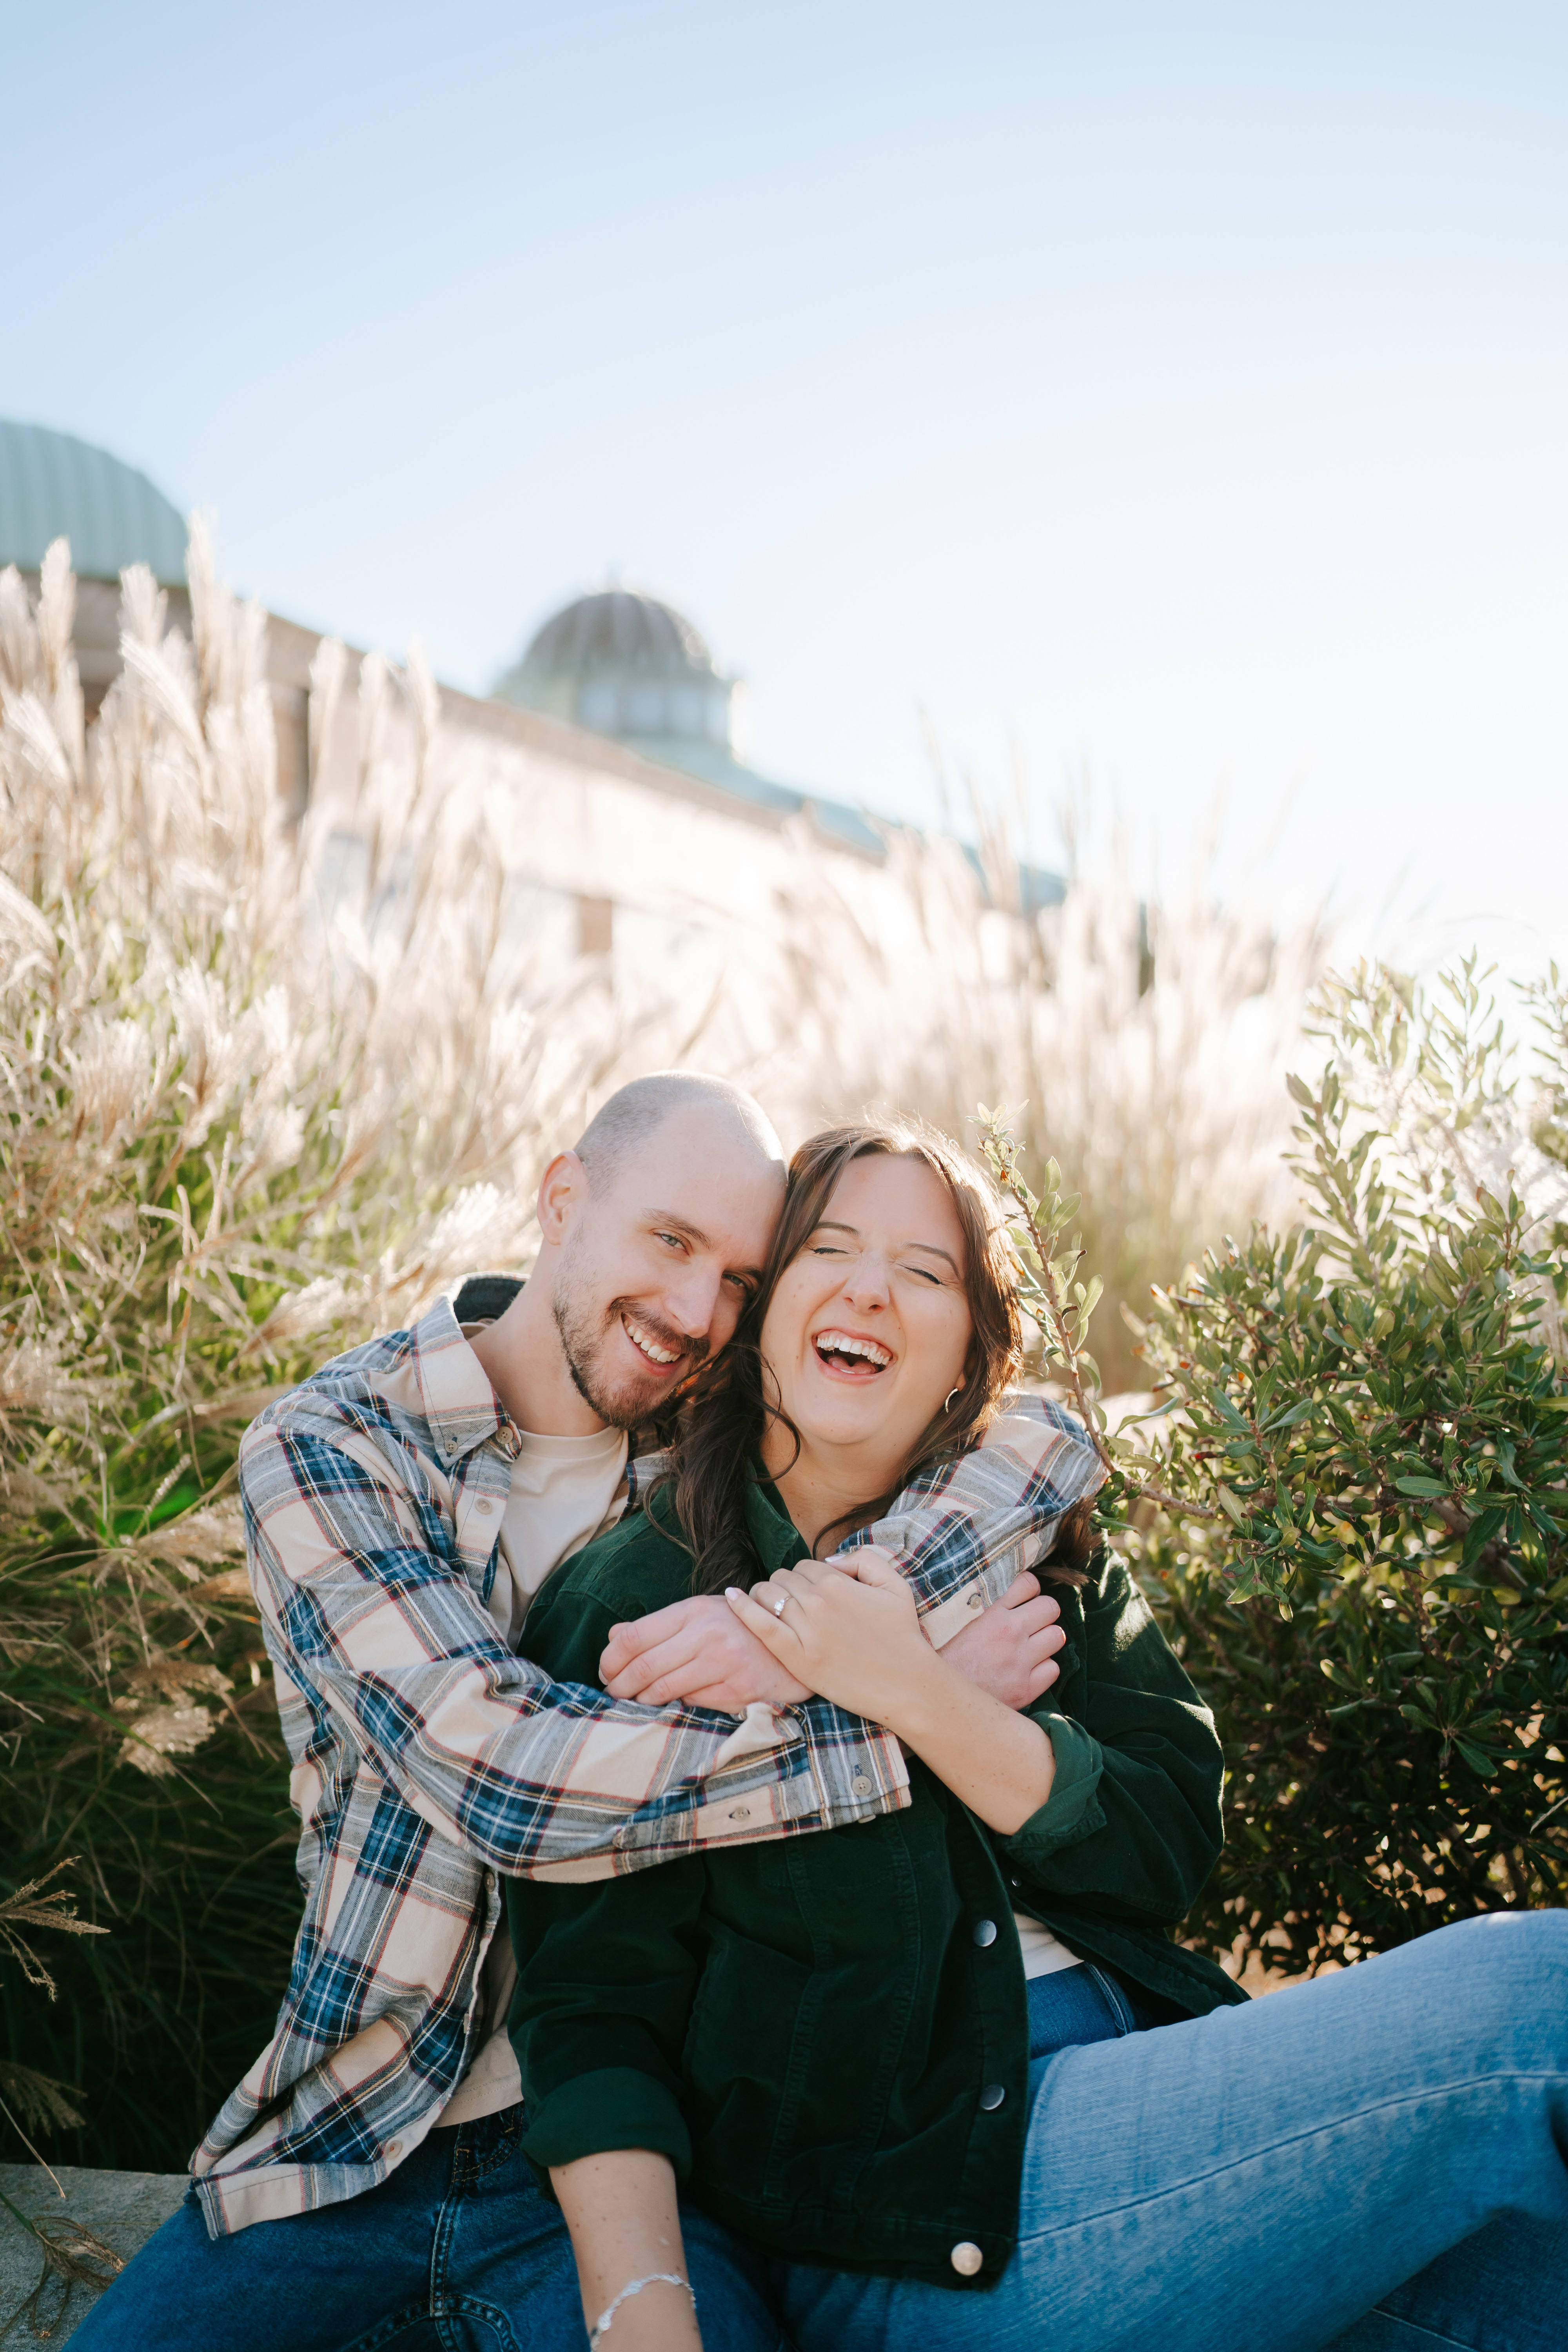 Joyful couple sharing a candid moment during their engagement photo shoot at Asbury Park Boardwalk, captured by Brenna Marie Photography, Maryland's true-to-color and candid storyteller for laid-back couples